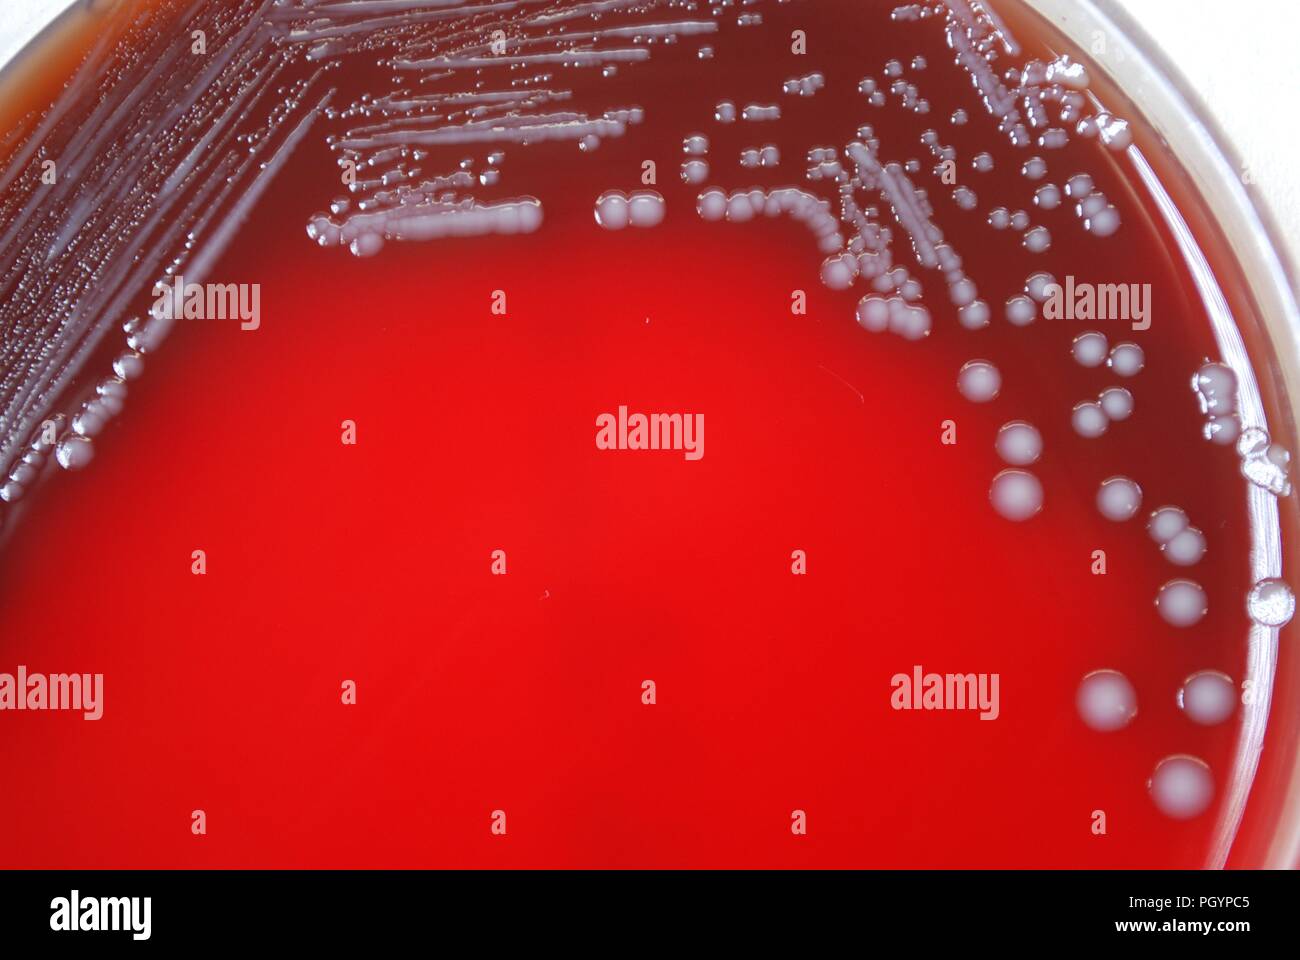 Colonial morphology of Gram-negative Yersinia pestis bacteria grown 72 hours on a medium of sheep's blood agar (SBA), 2010. Image courtesy Centers for Disease Control (CDC) / Dr Todd Parker, Audra Marsh. () Stock Photo